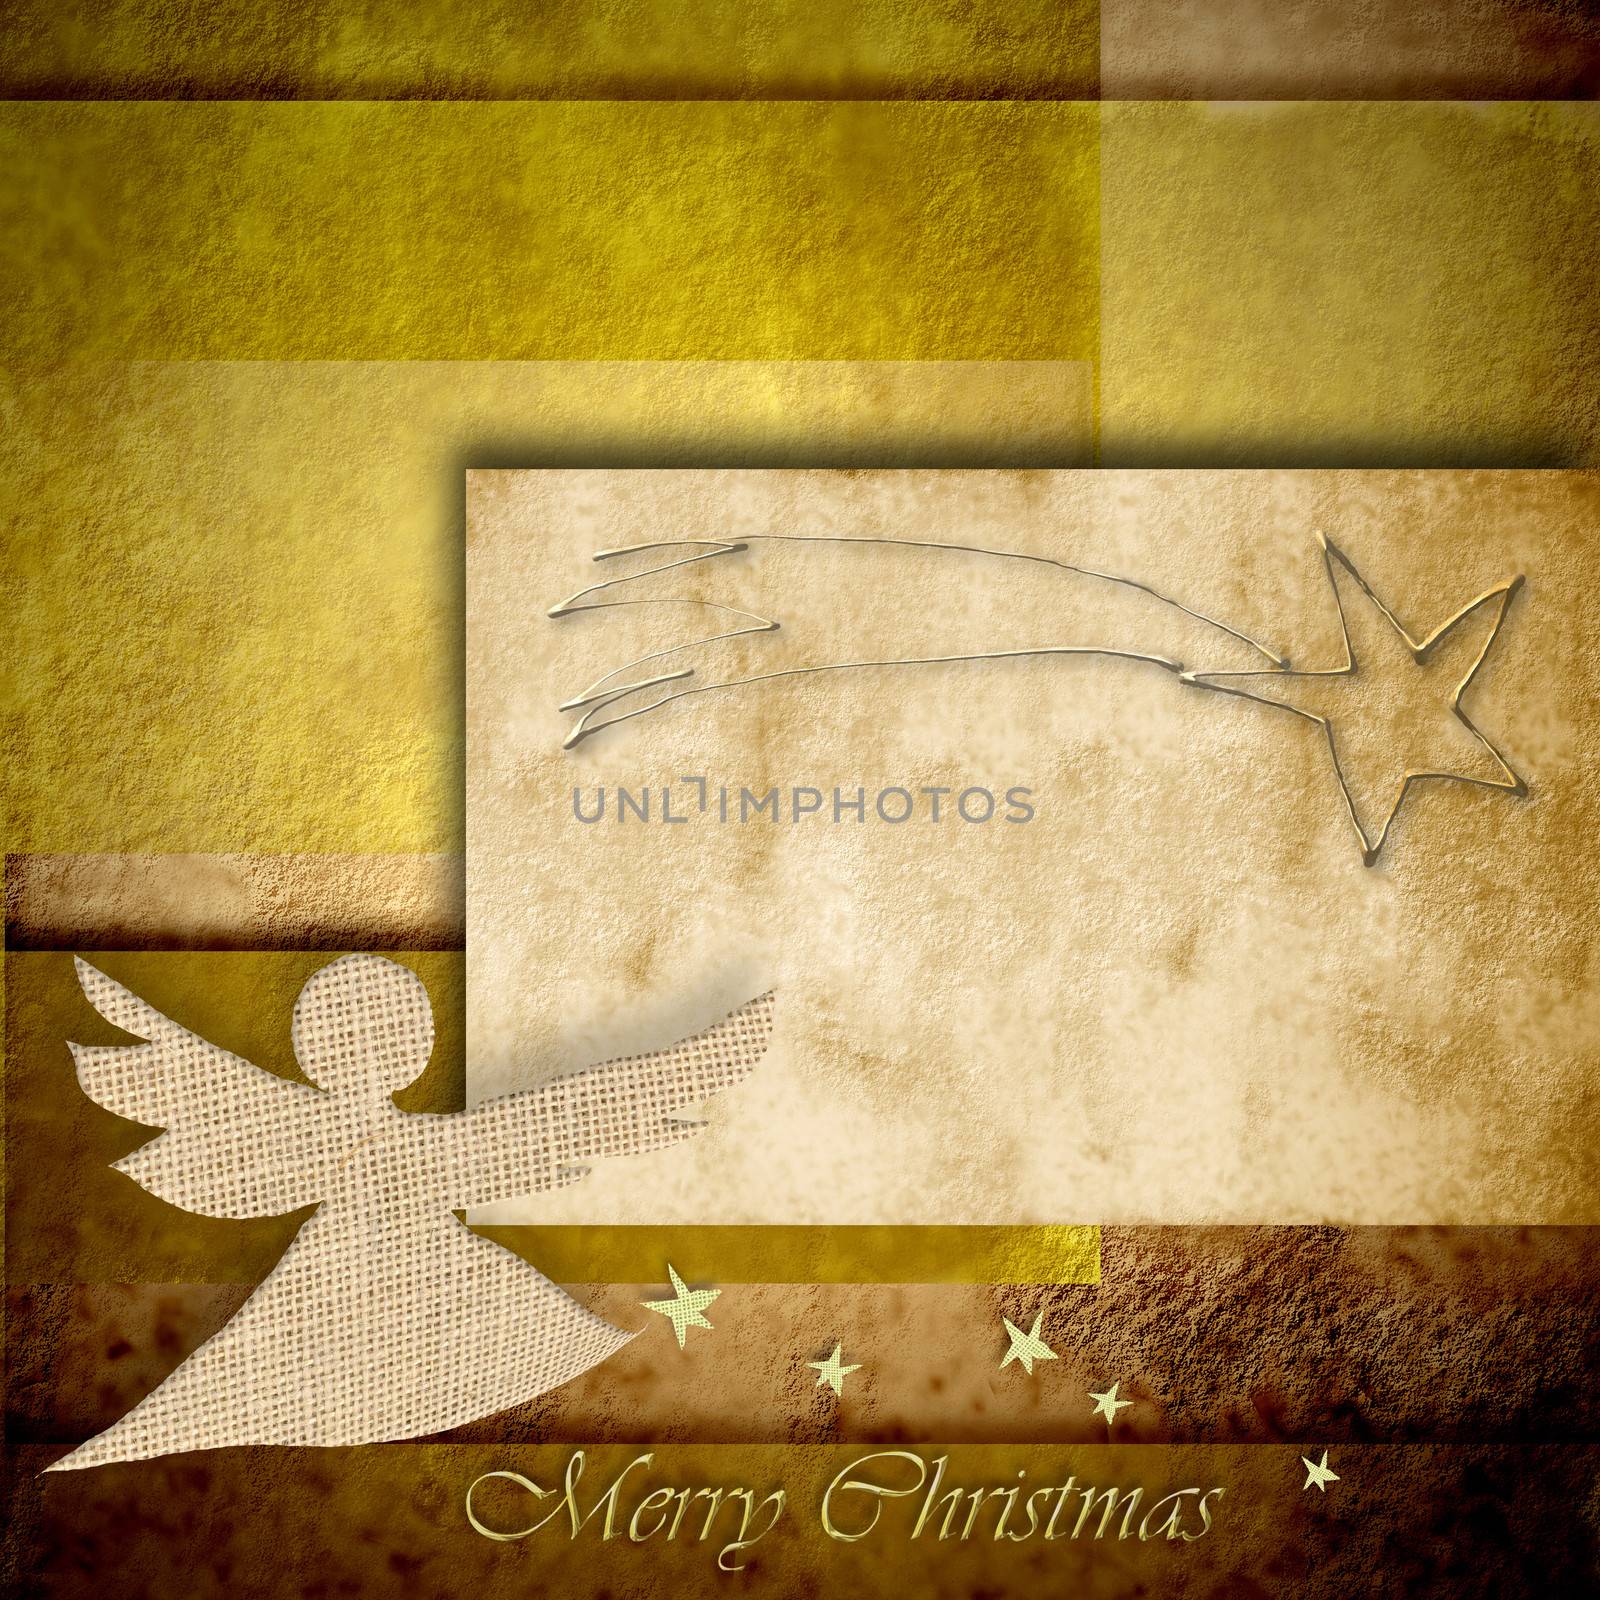 Angel Christmas background with space for writing in gold tones